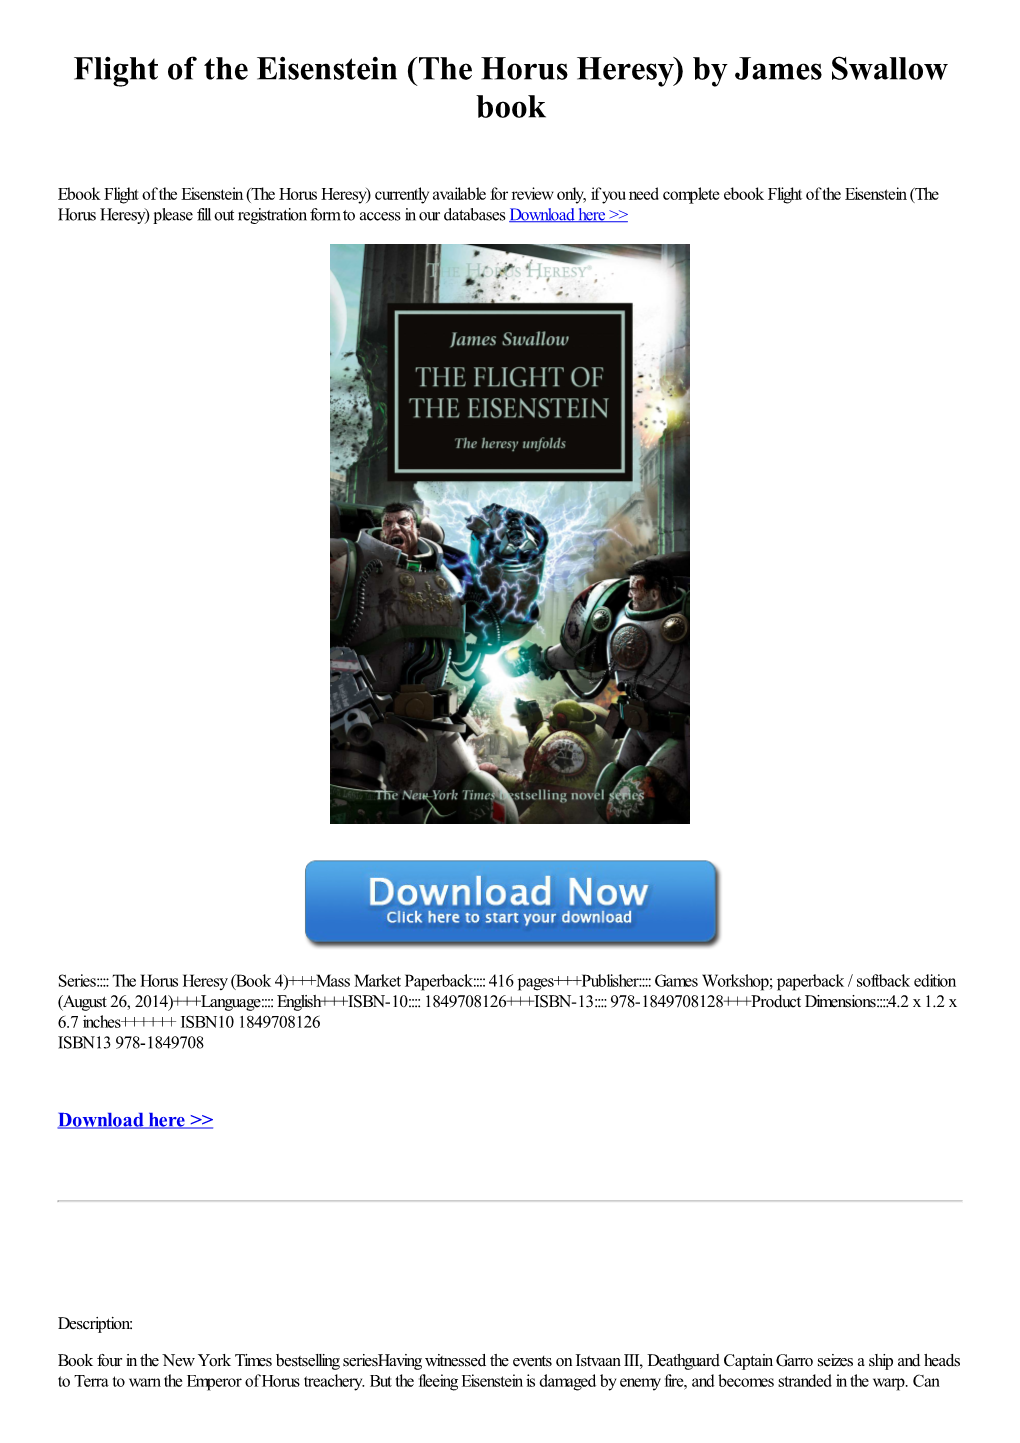 Flight of the Eisenstein (The Horus Heresy) by James Swallow Book